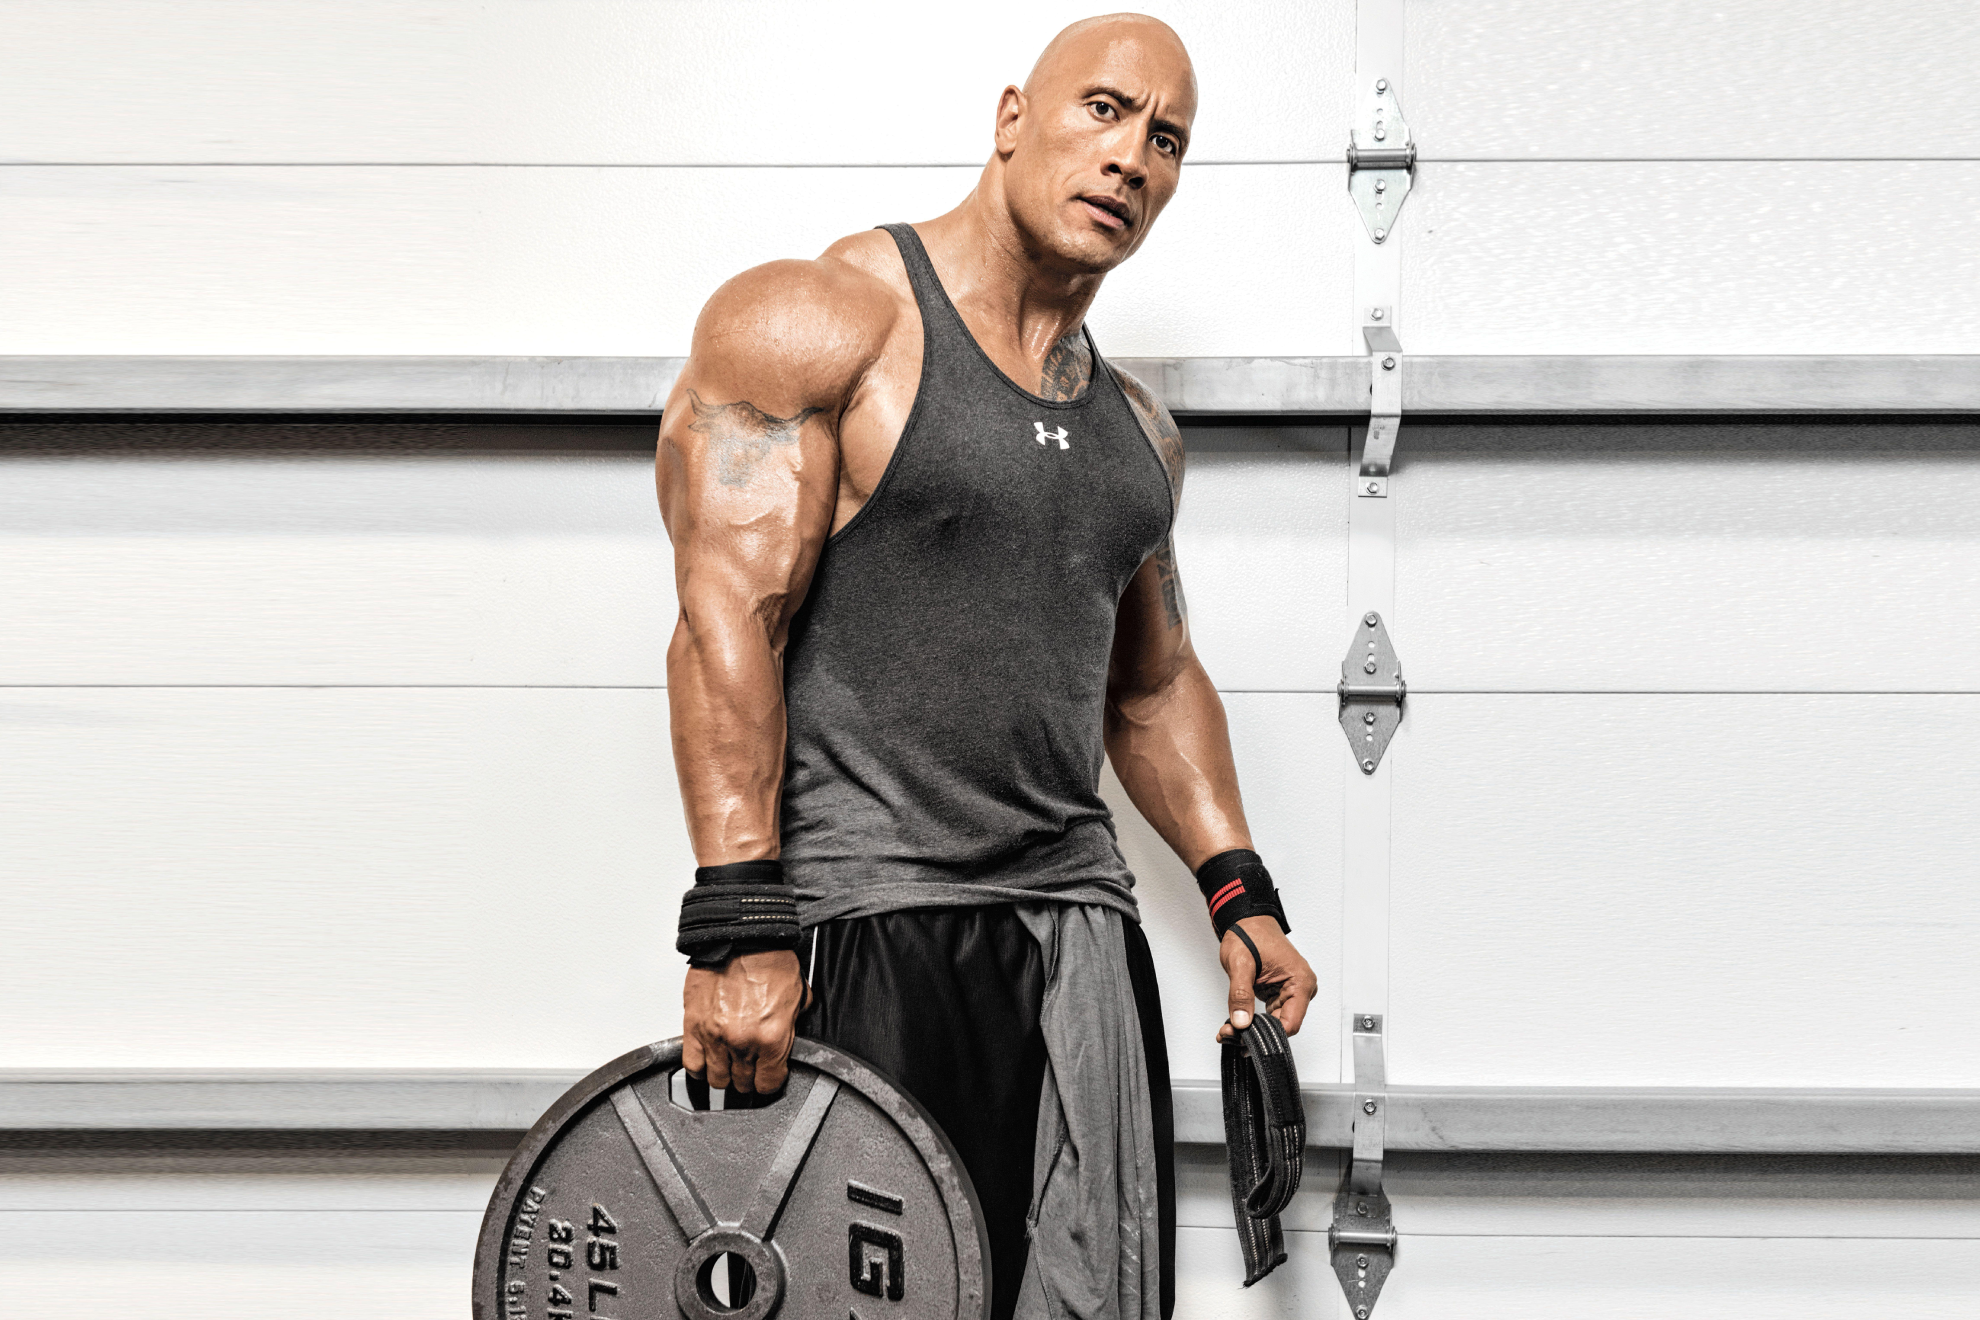 Dwayne 'The Rock' Johnson proves he's not human with incredible display of strength in the gym